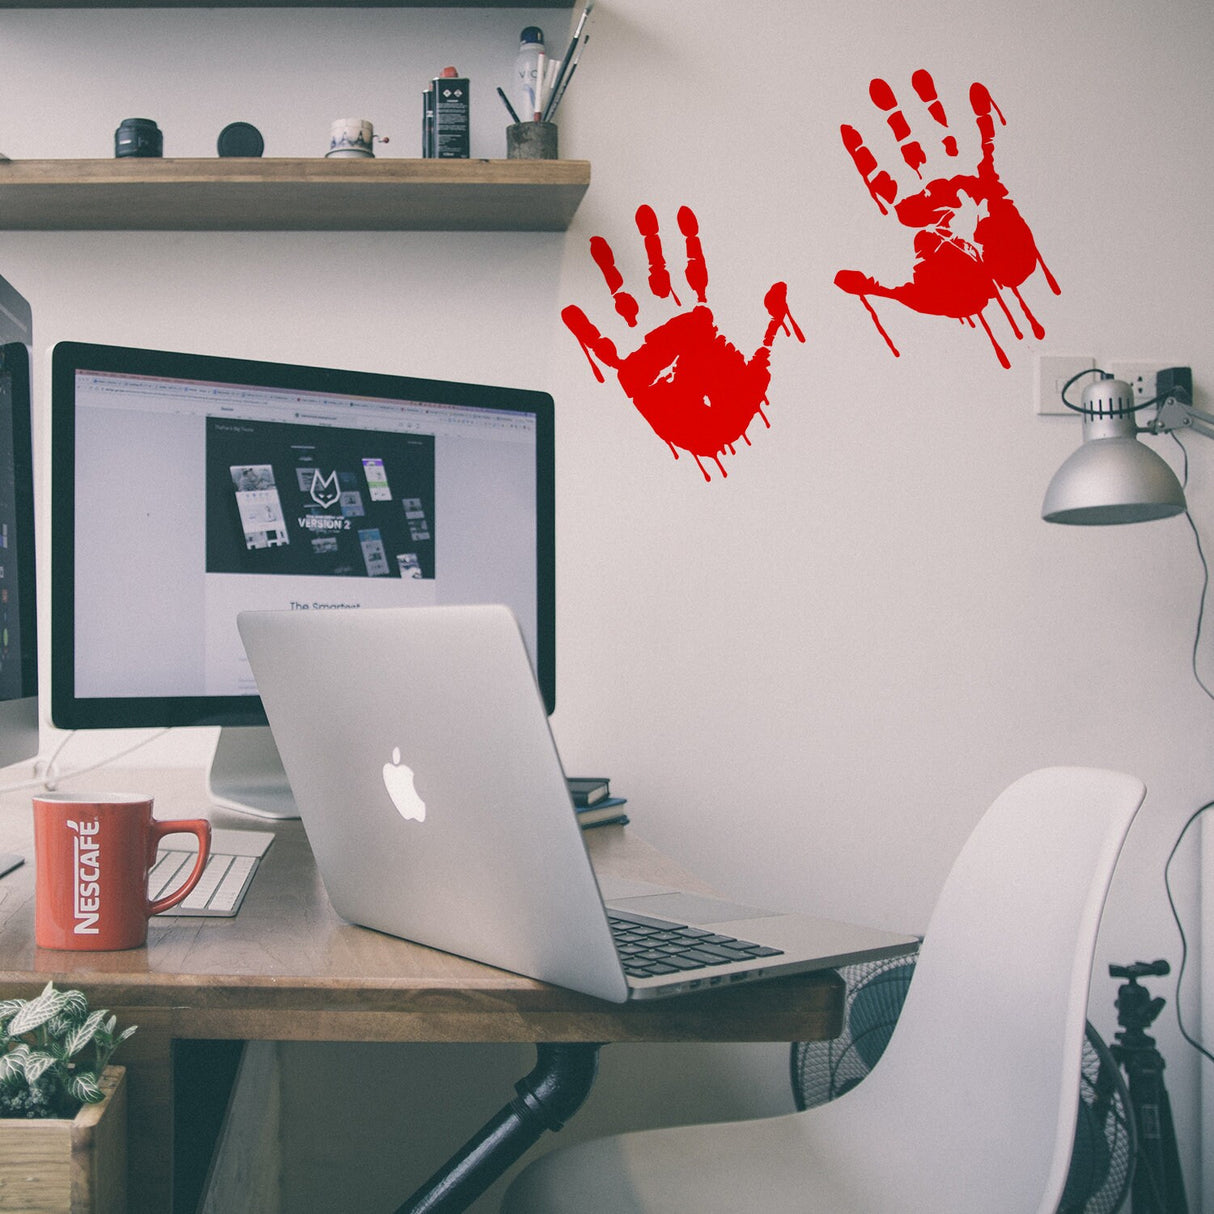 Bloody Hands Scary Red Vinyl Sticker - Zombie Blood Car Wall Laptop Window Halloween Decal Print